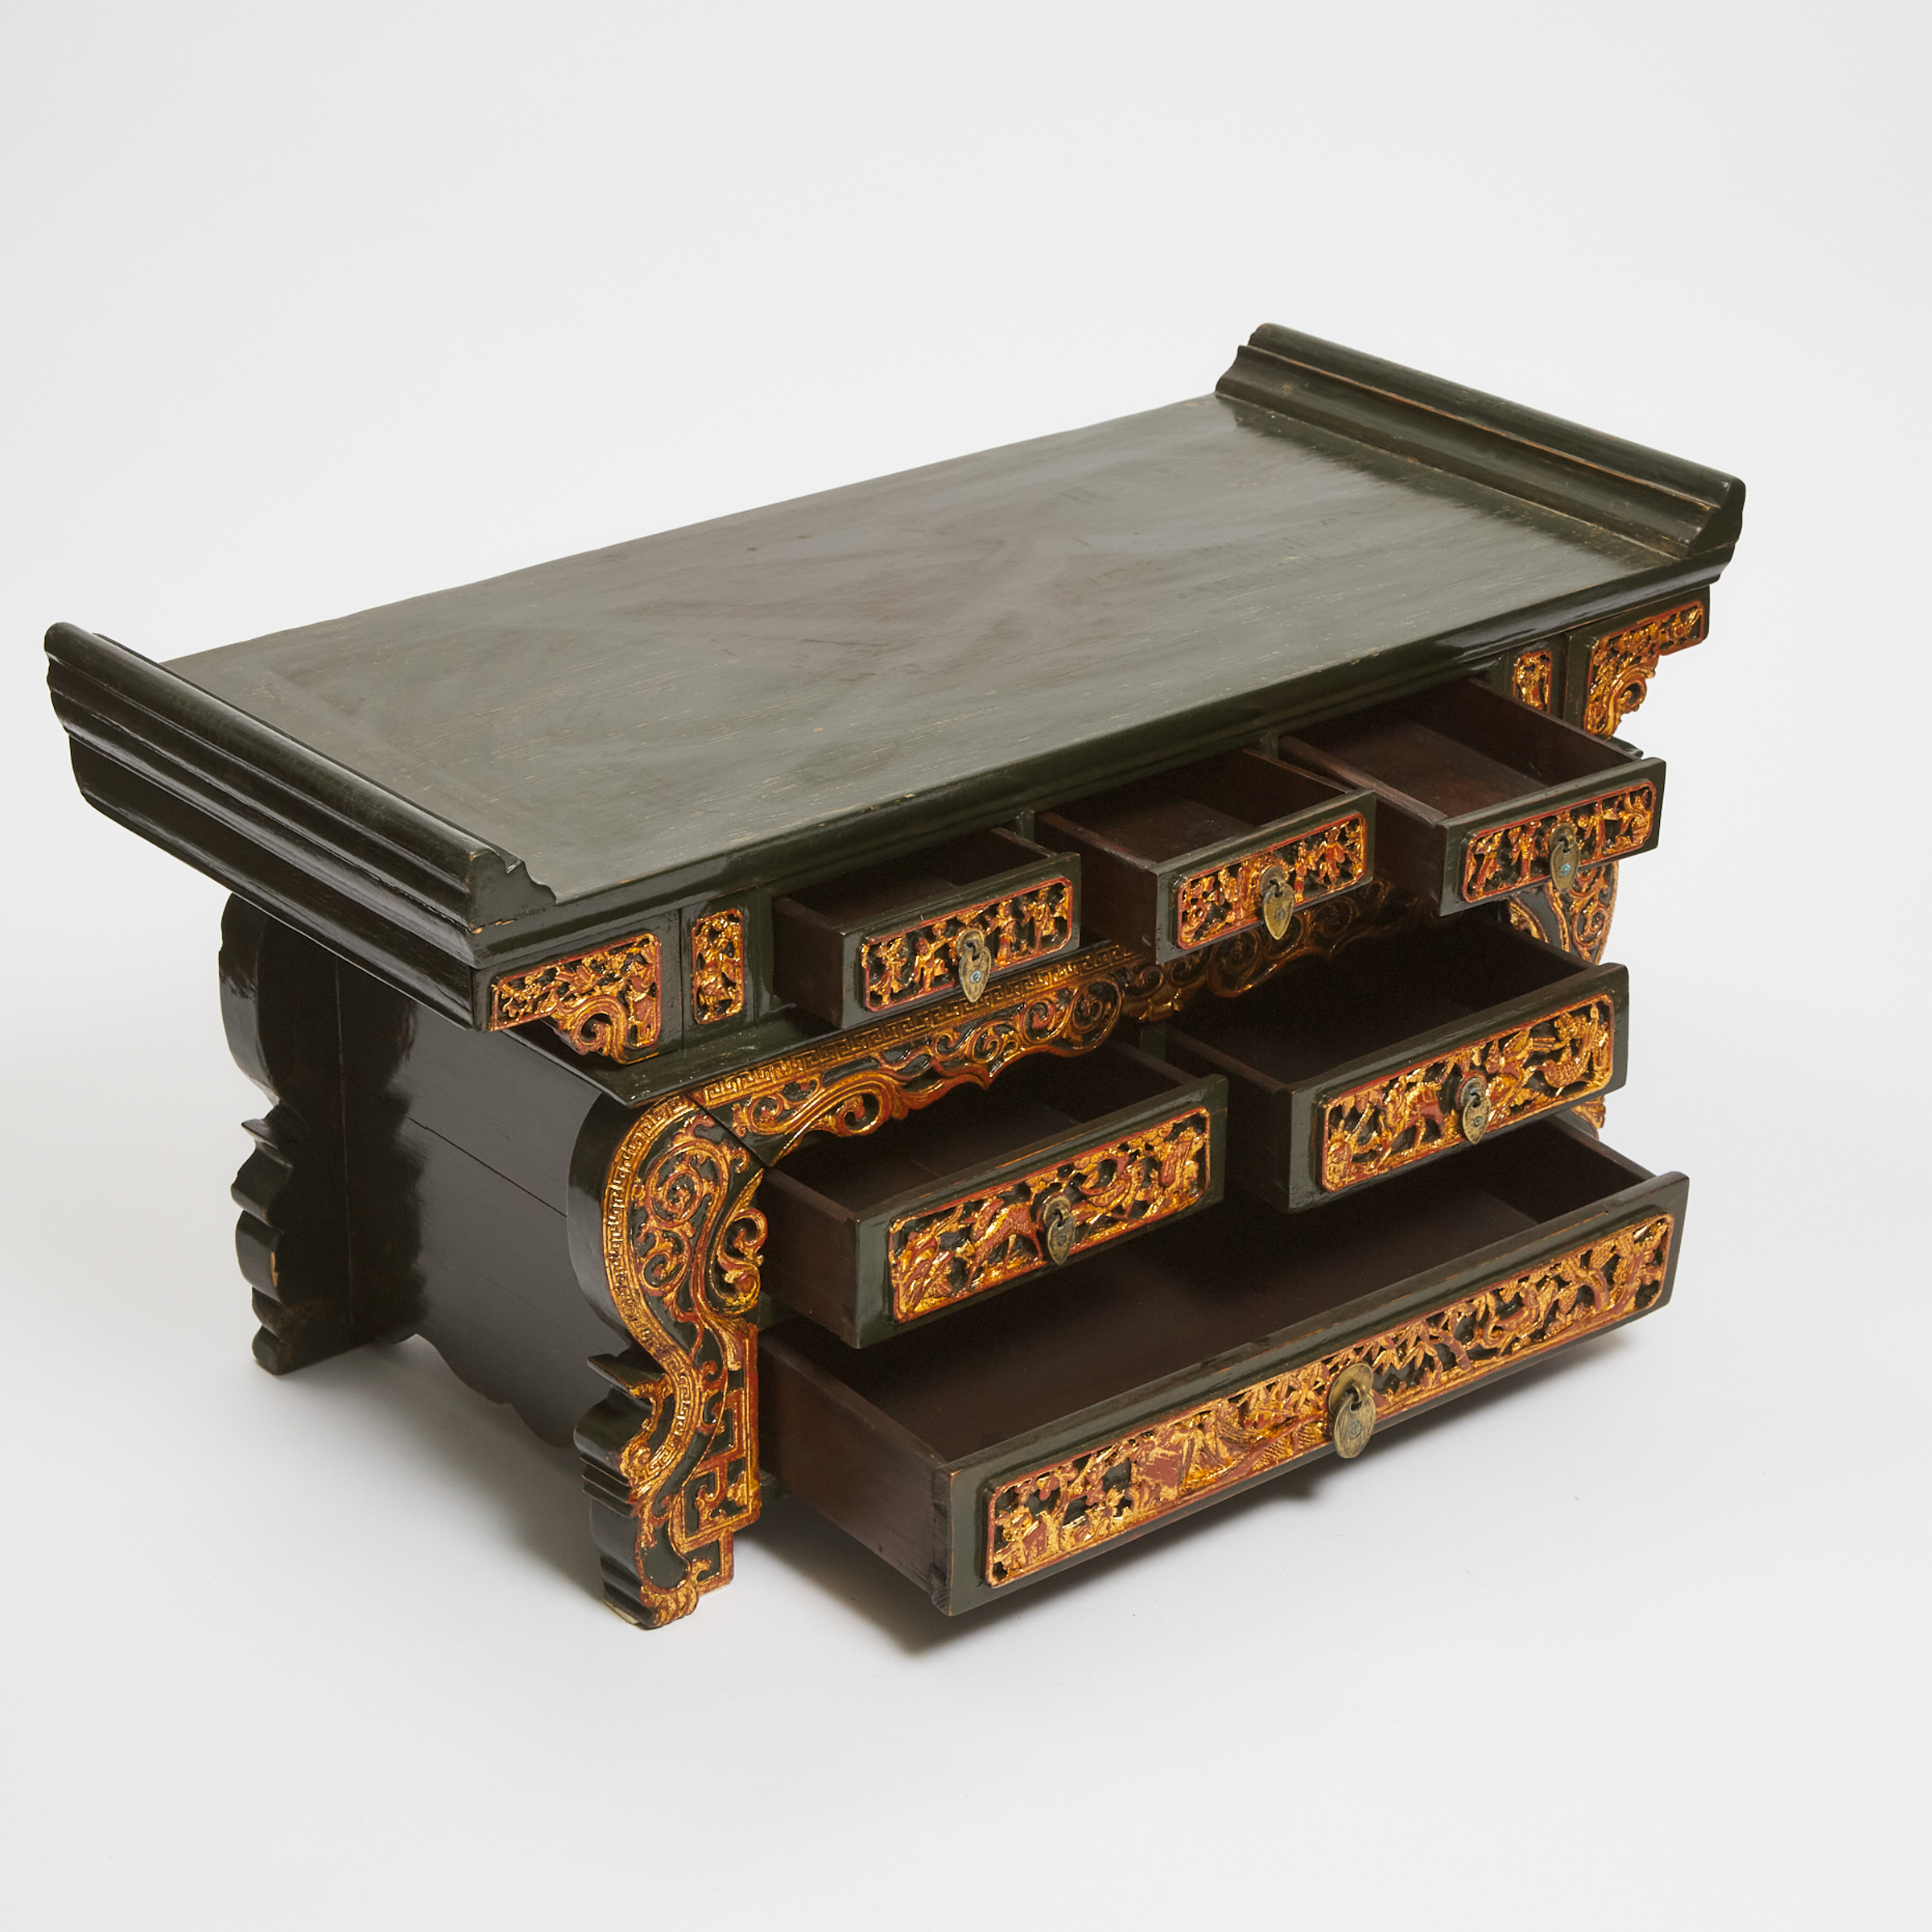 A Small Chinese Lacquered Altar 3ab93a